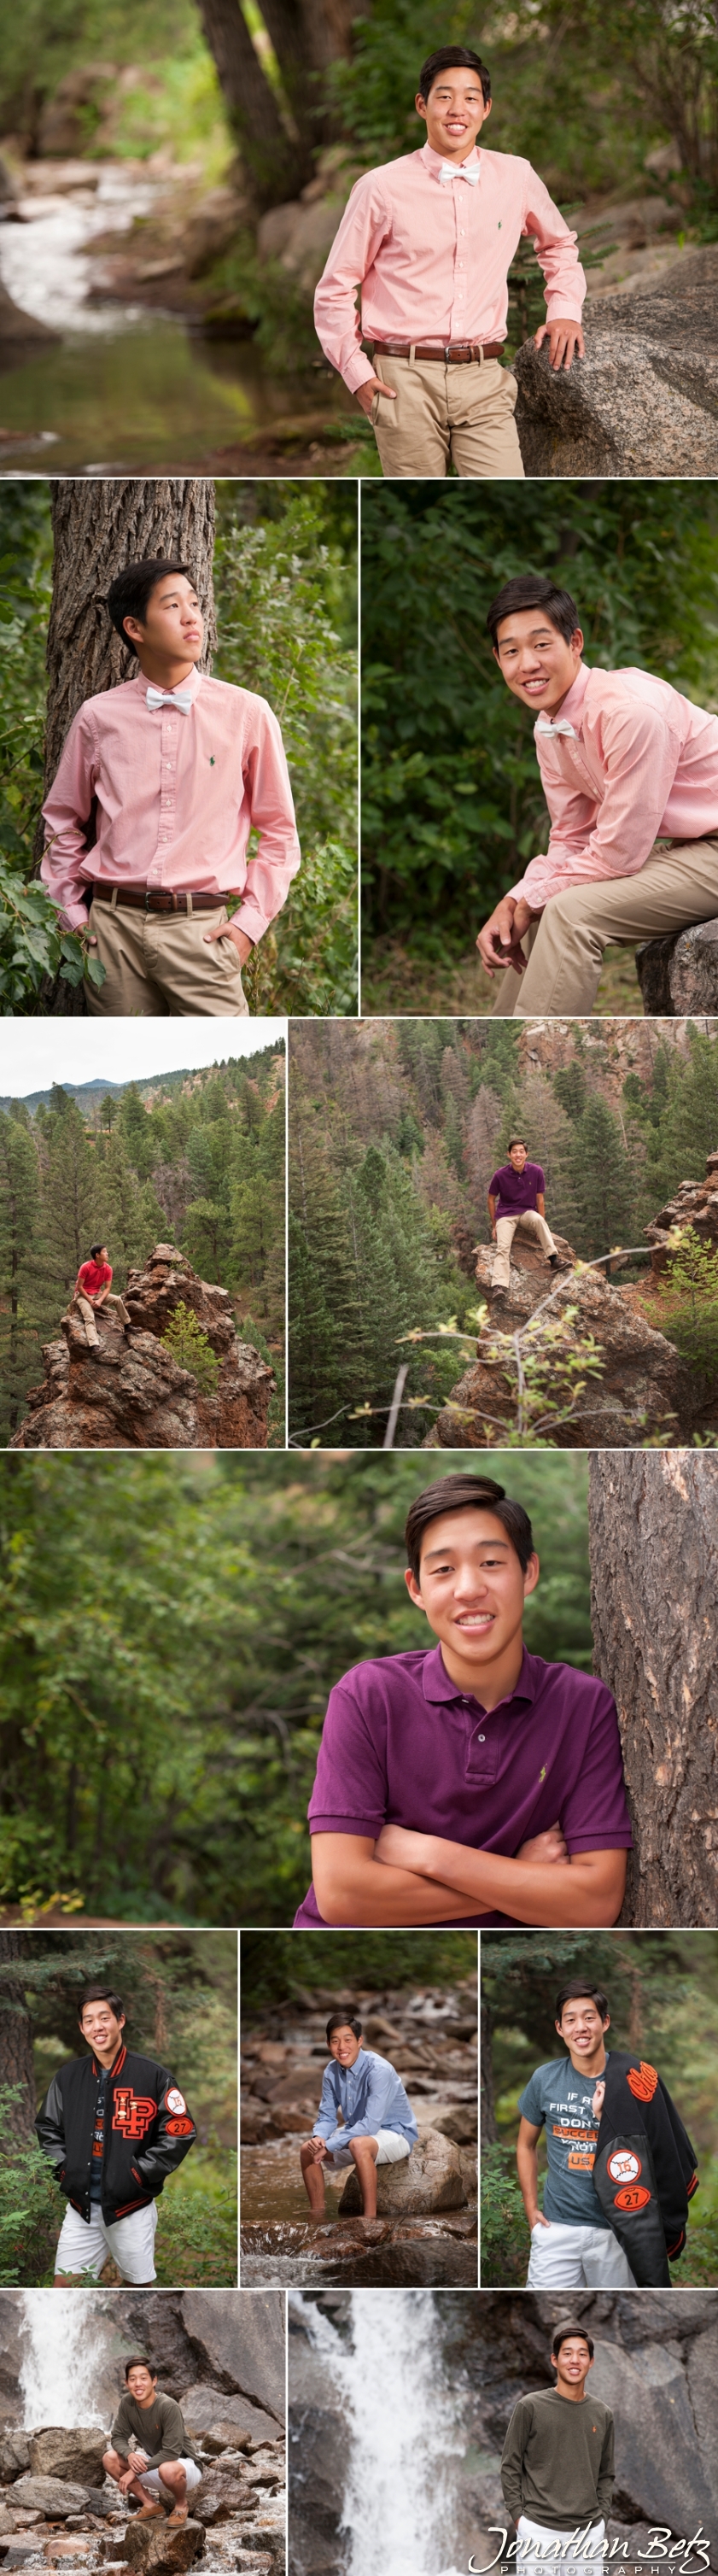 Colorado Springs Senior Pictures Jonathan Betz Photography Monument Lewis Palmer High School